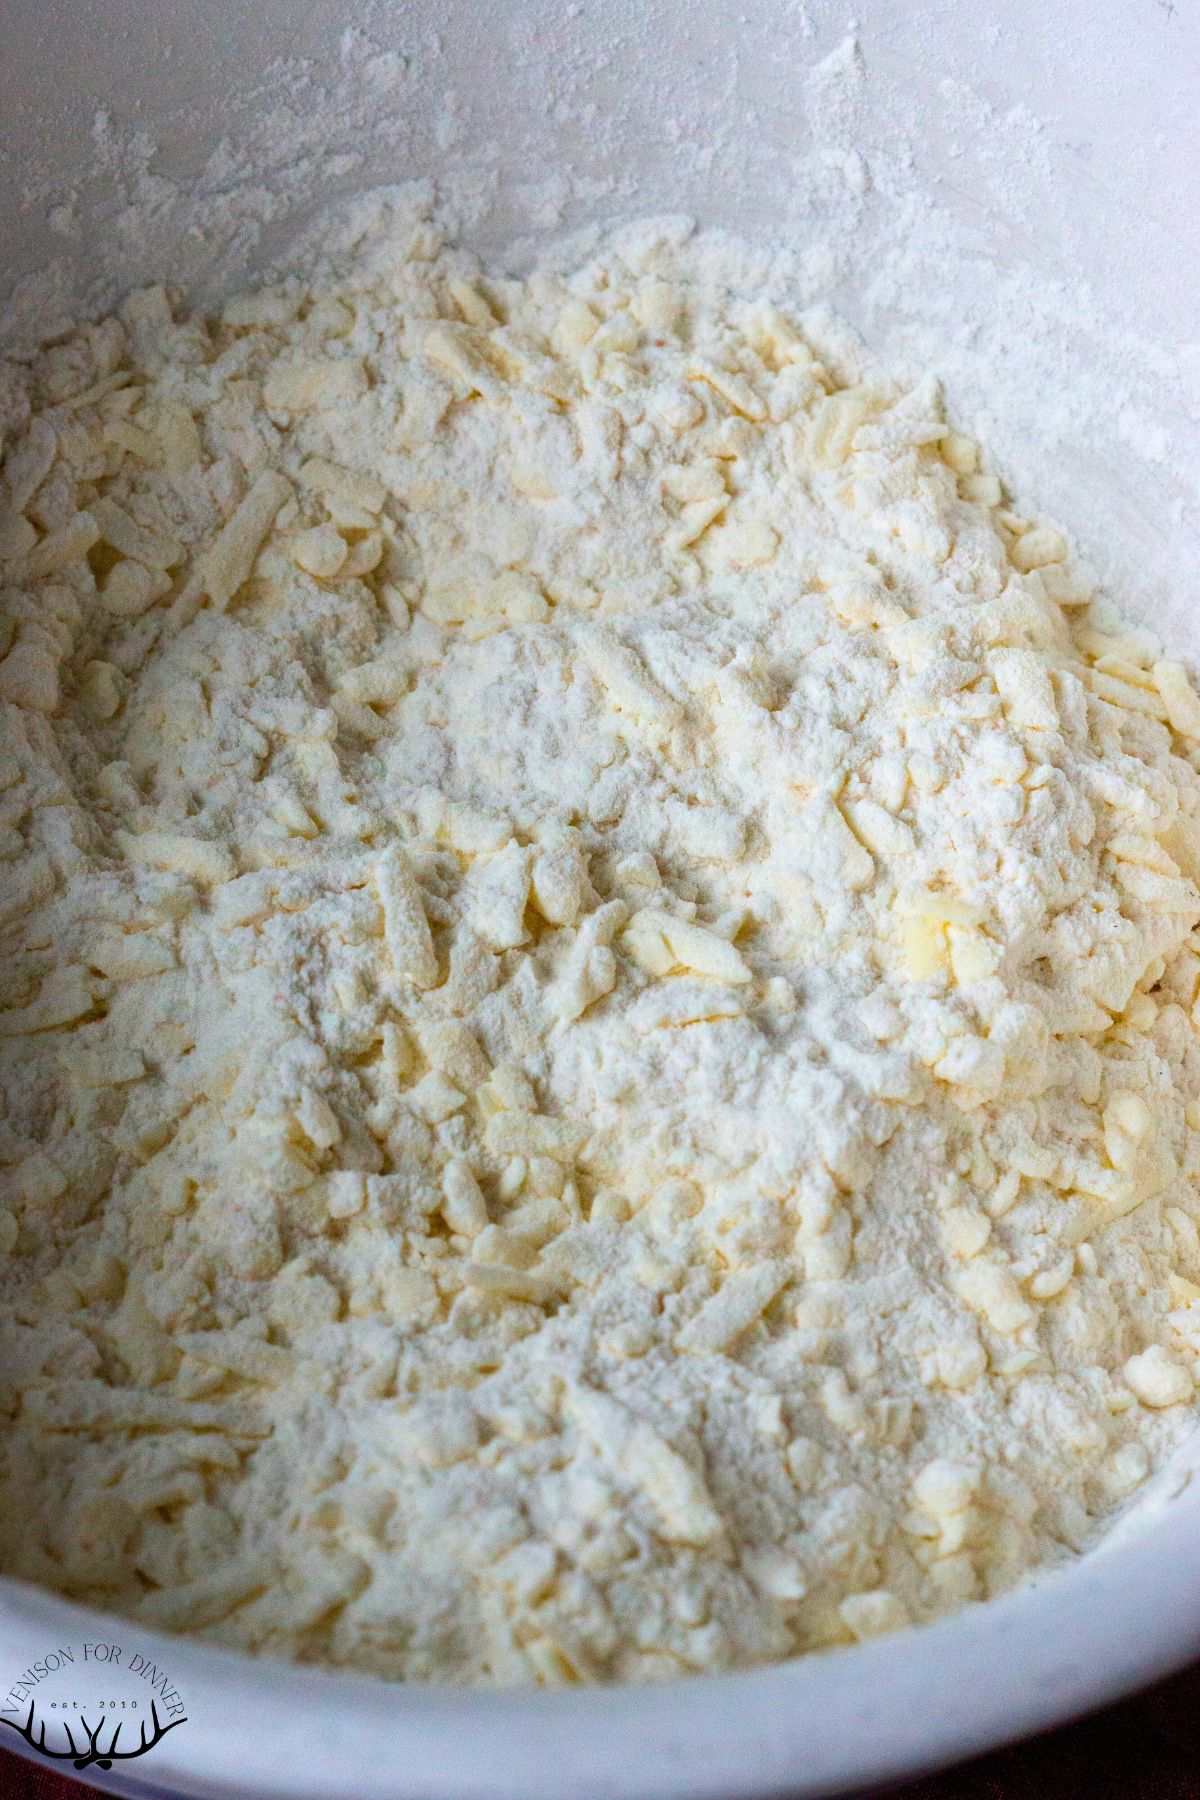 Grated butter coated in flour in a mixing bowl.